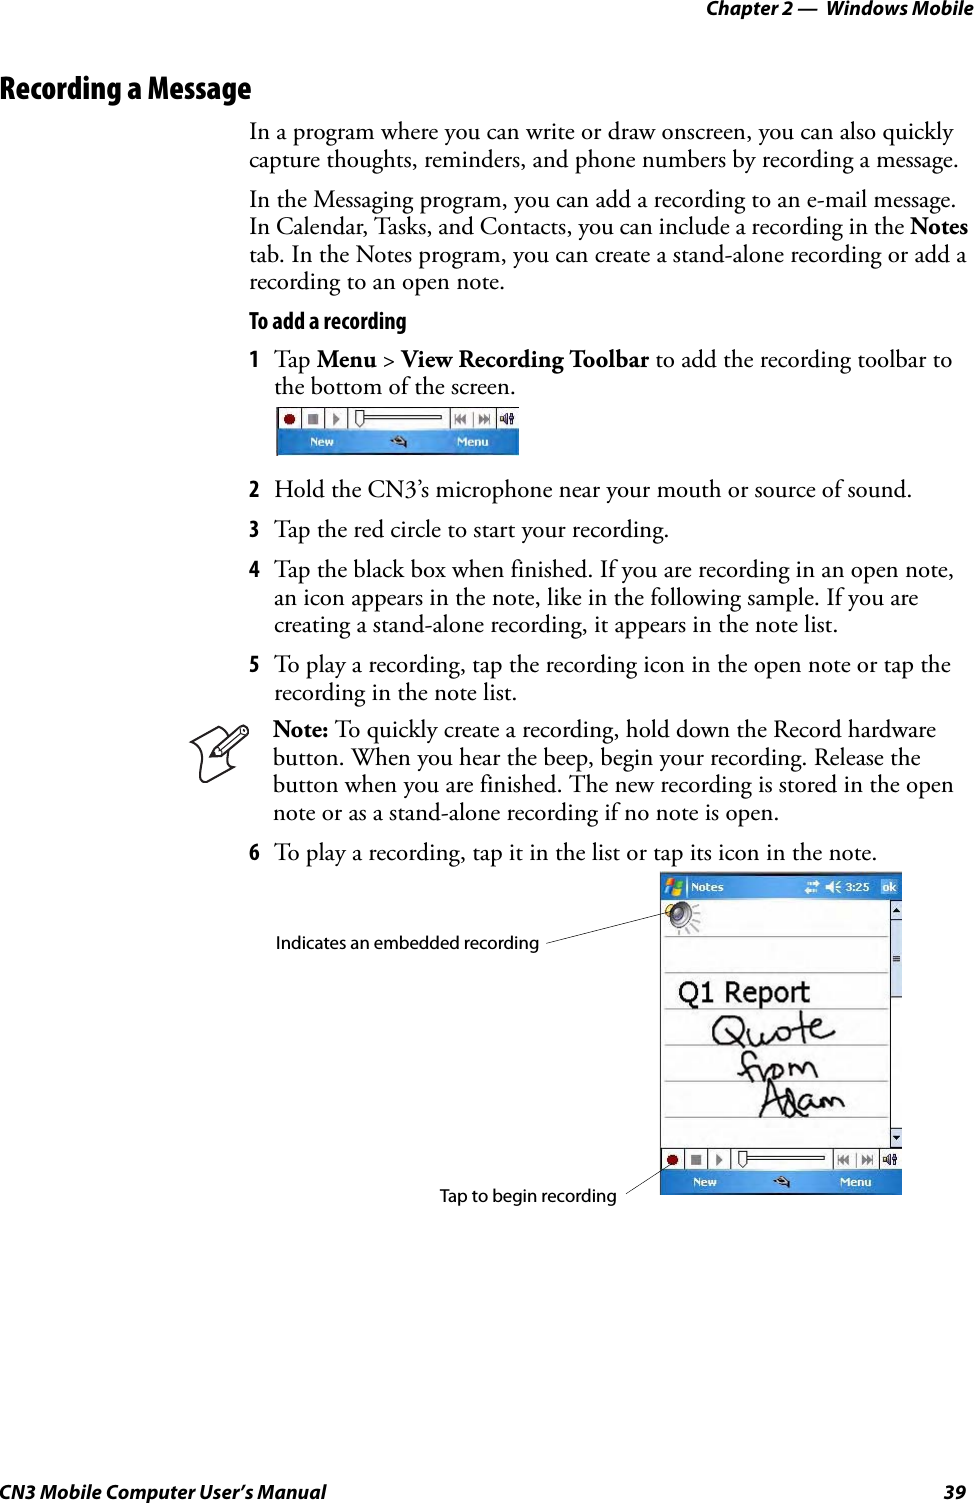 Chapter 2 —  Windows MobileCN3 Mobile Computer User’s Manual 39Recording a MessageIn a program where you can write or draw onscreen, you can also quickly capture thoughts, reminders, and phone numbers by recording a message. In the Messaging program, you can add a recording to an e-mail message. In Calendar, Tasks, and Contacts, you can include a recording in the Notes tab. In the Notes program, you can create a stand-alone recording or add a recording to an open note.To add a recording1Tap  Menu &gt; View Recording Toolbar to add the recording toolbar to the bottom of the screen.2Hold the CN3’s microphone near your mouth or source of sound.3Tap the red circle to start your recording.4Tap the black box when finished. If you are recording in an open note, an icon appears in the note, like in the following sample. If you are creating a stand-alone recording, it appears in the note list.5To play a recording, tap the recording icon in the open note or tap the recording in the note list.6To play a recording, tap it in the list or tap its icon in the note.Note: To quickly create a recording, hold down the Record hardware button. When you hear the beep, begin your recording. Release the button when you are finished. The new recording is stored in the open note or as a stand-alone recording if no note is open.Tap to begin recordingIndicates an embedded recording